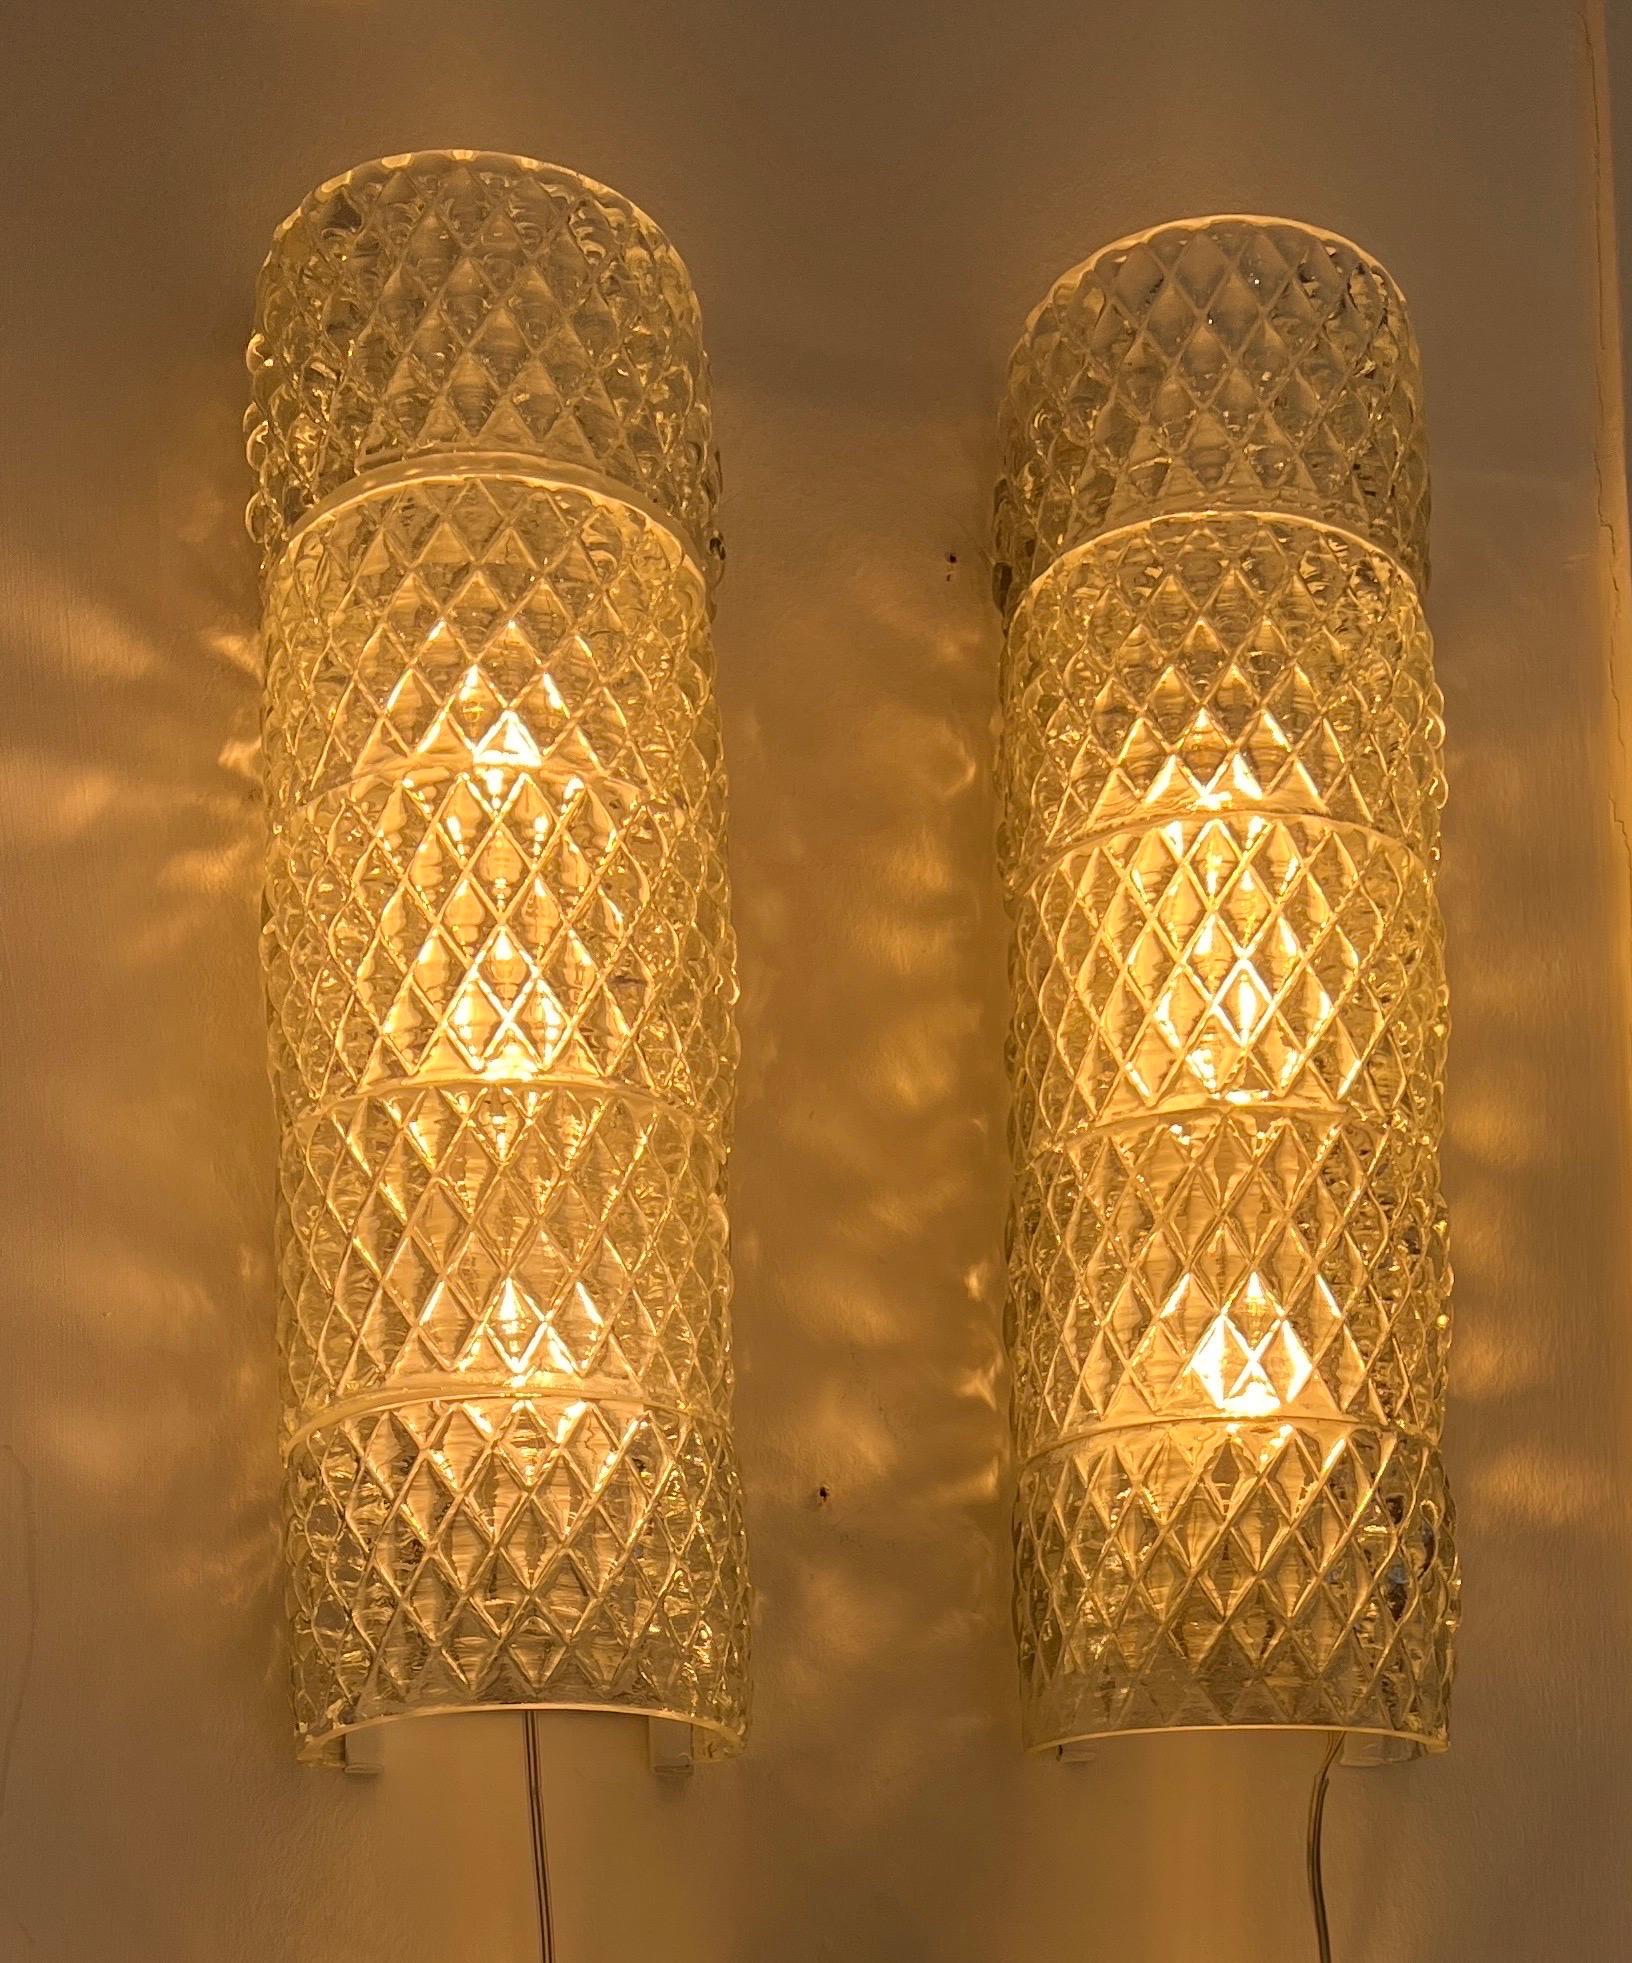 A rare pair of Venini glass wall sconces consisting of five semicircular blown glass each produced around the 1940s . The glass is exhibited at the Museo del vetro di Murano. 
We have an additional pair of four tiers each that you could install